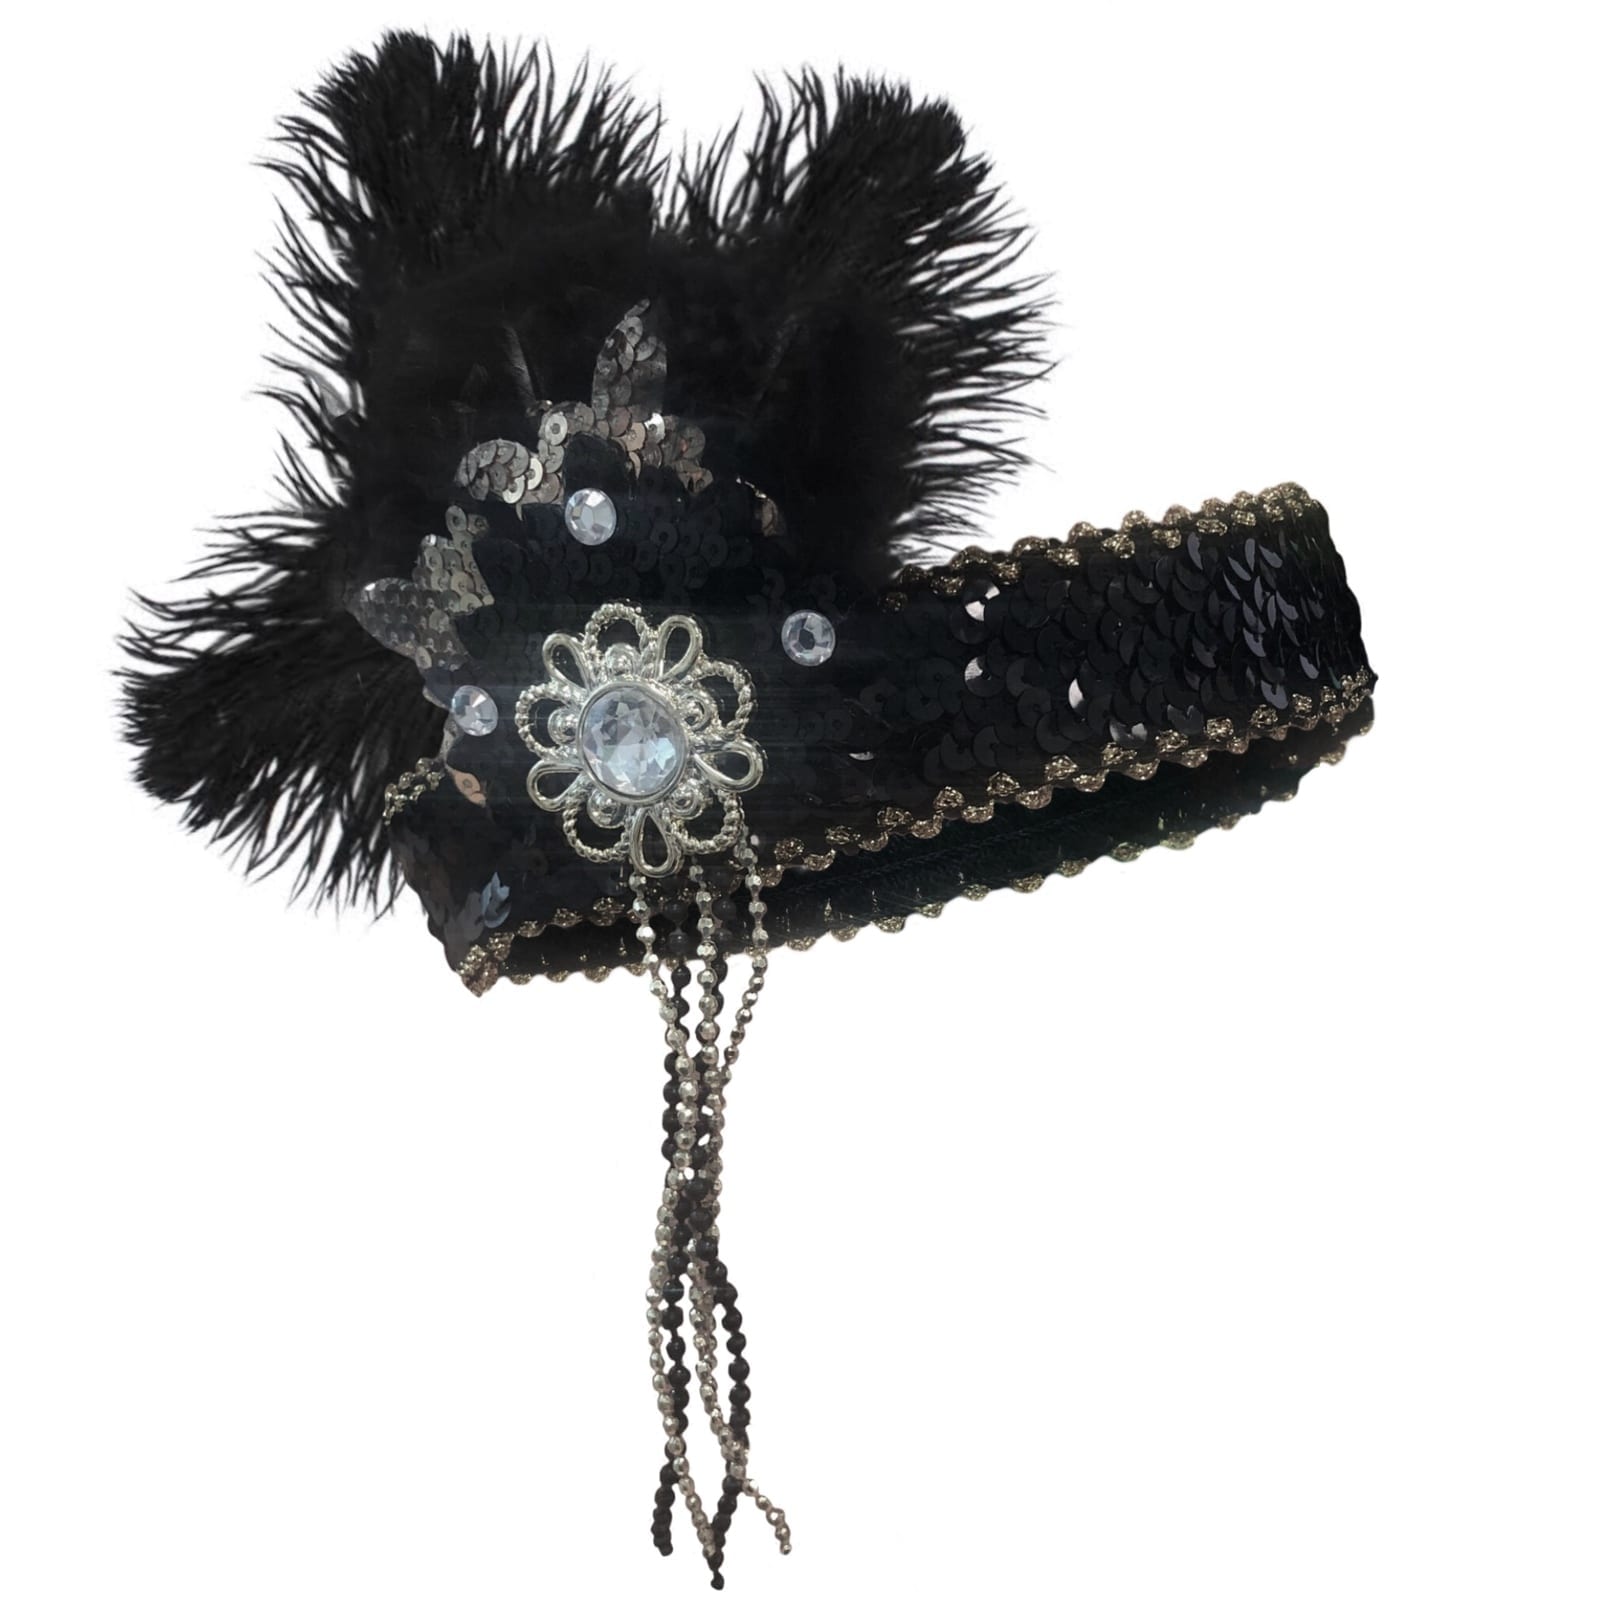 Featured image for “Flapper Headpiece (Deluxe Black/Silver)”